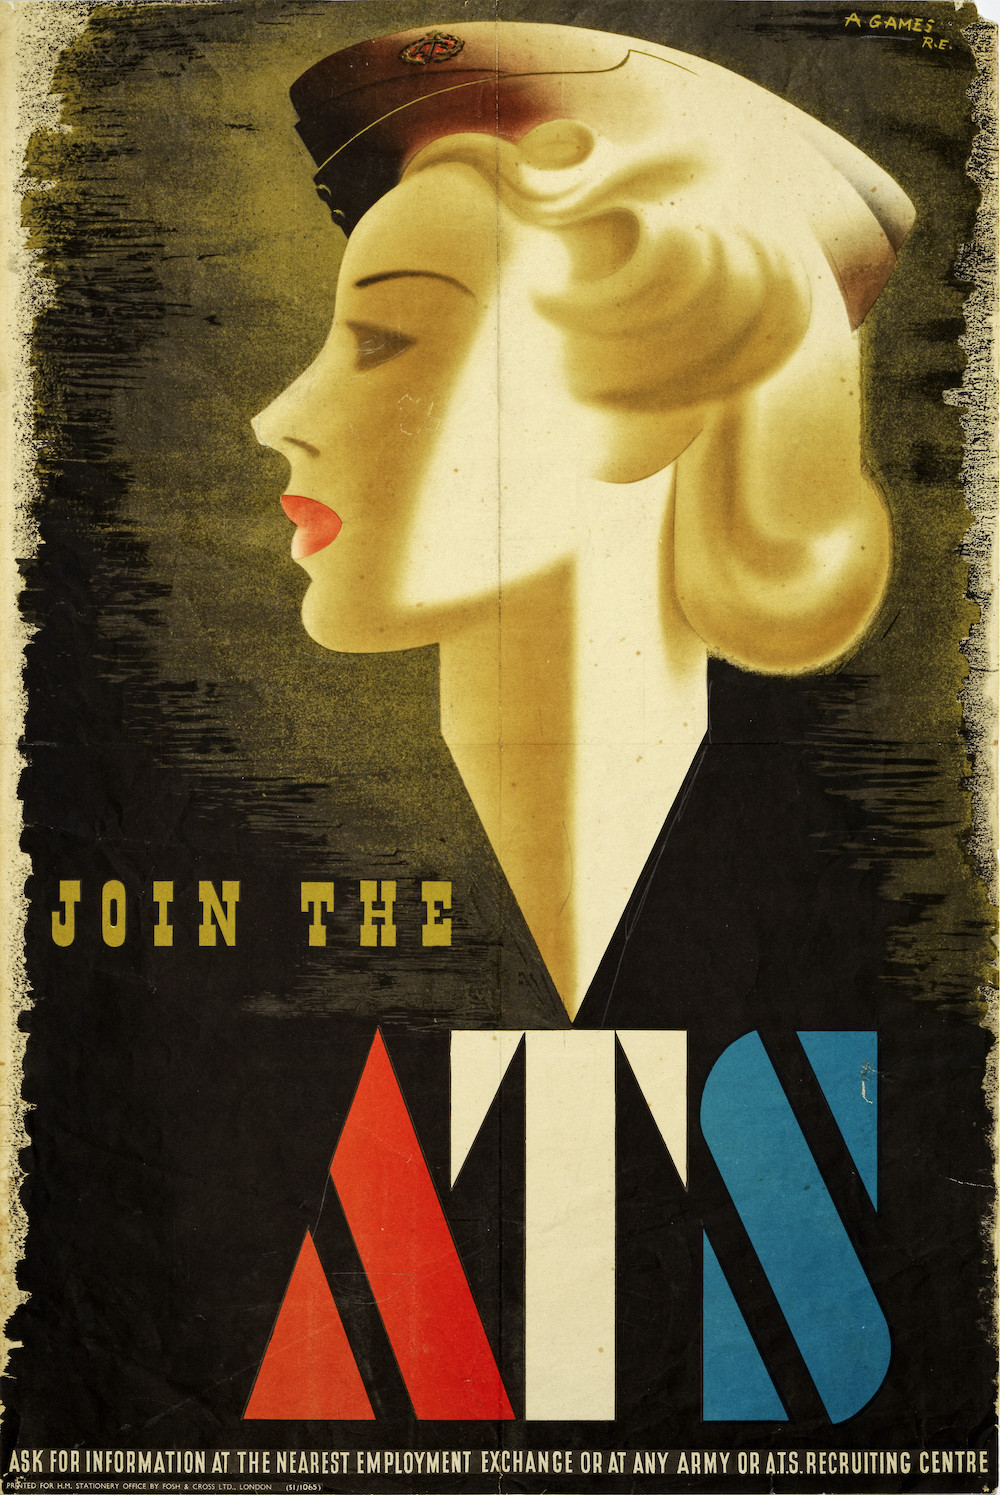 Vintage poster 'Join The ATS' designed by Abram Games in 1941